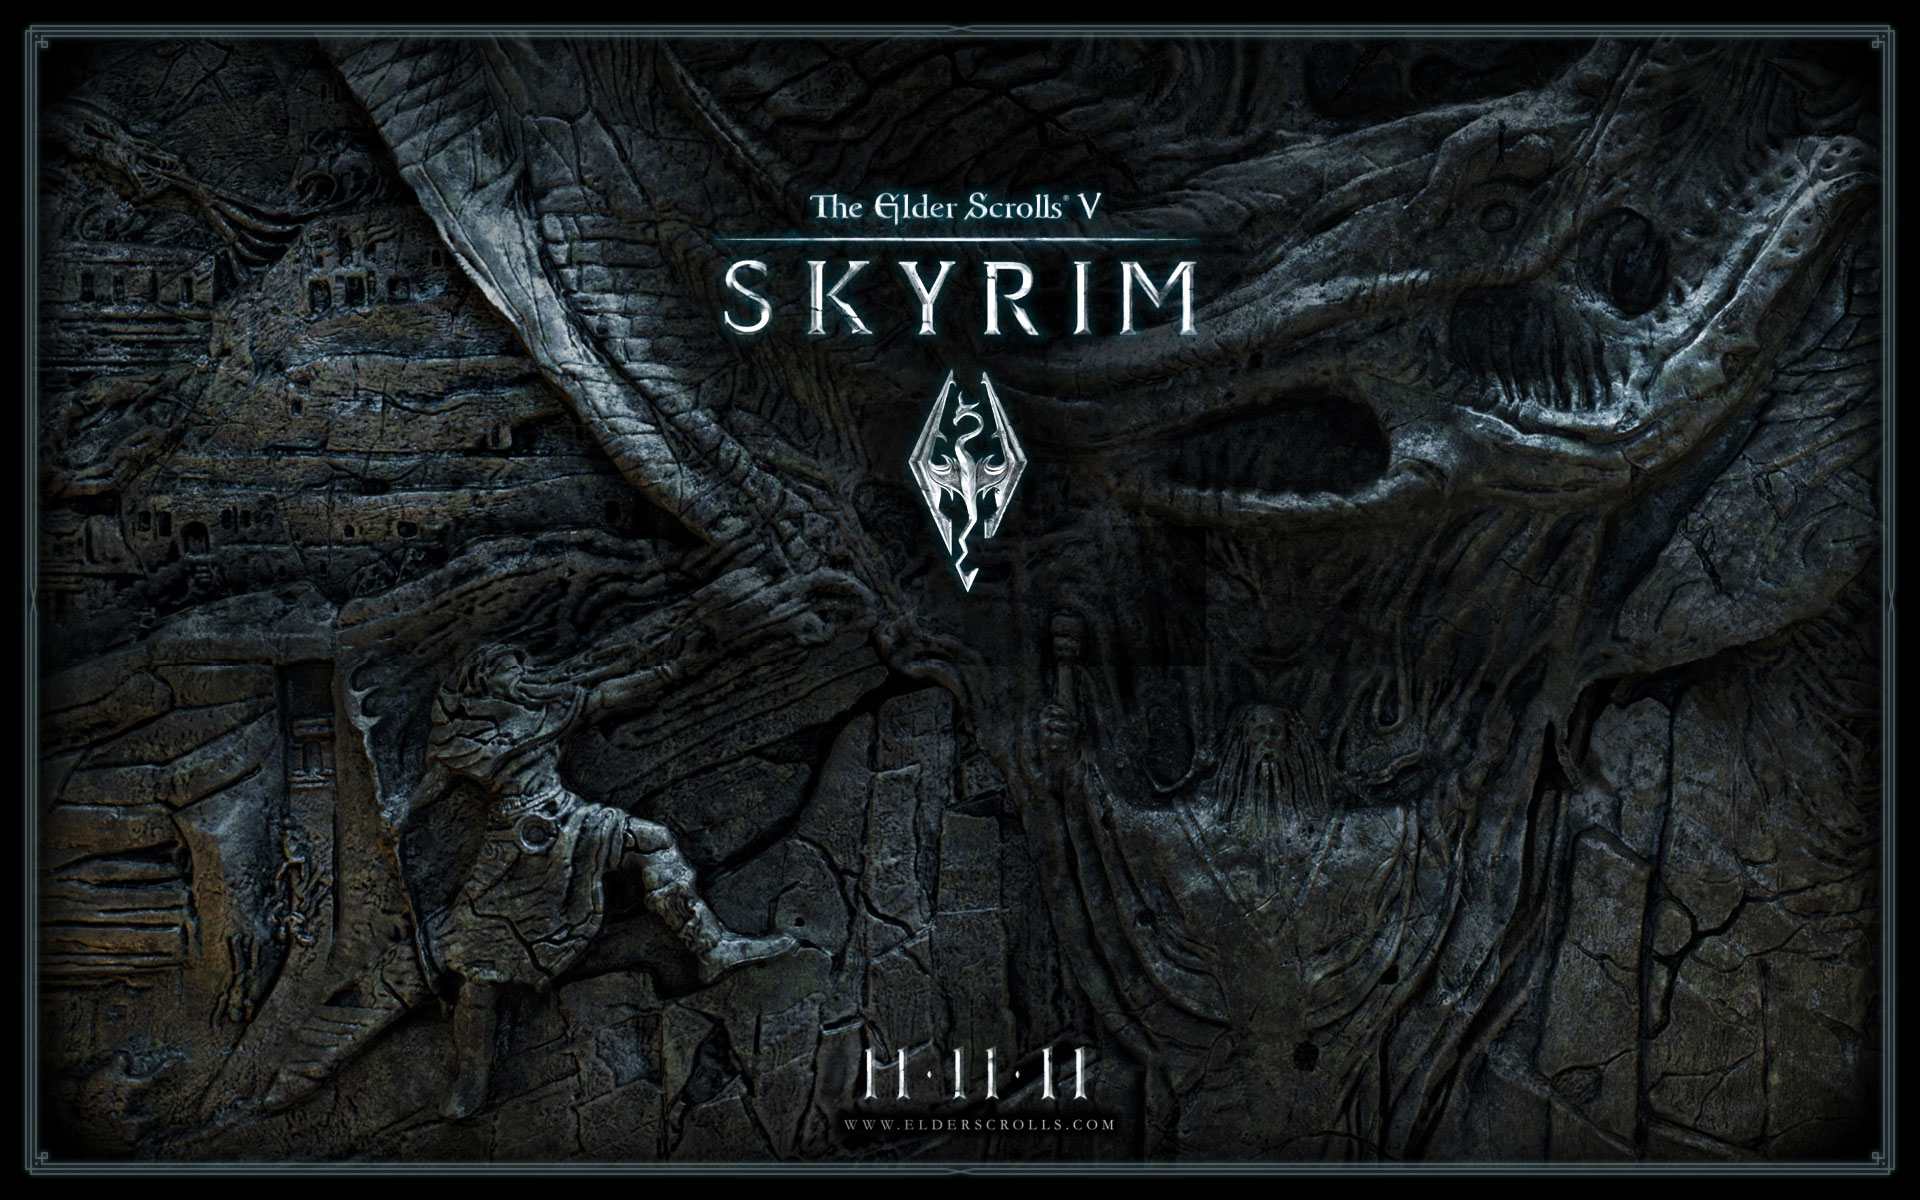 Here S Of The Best Skyrim Wallpaper For Visual Consumption